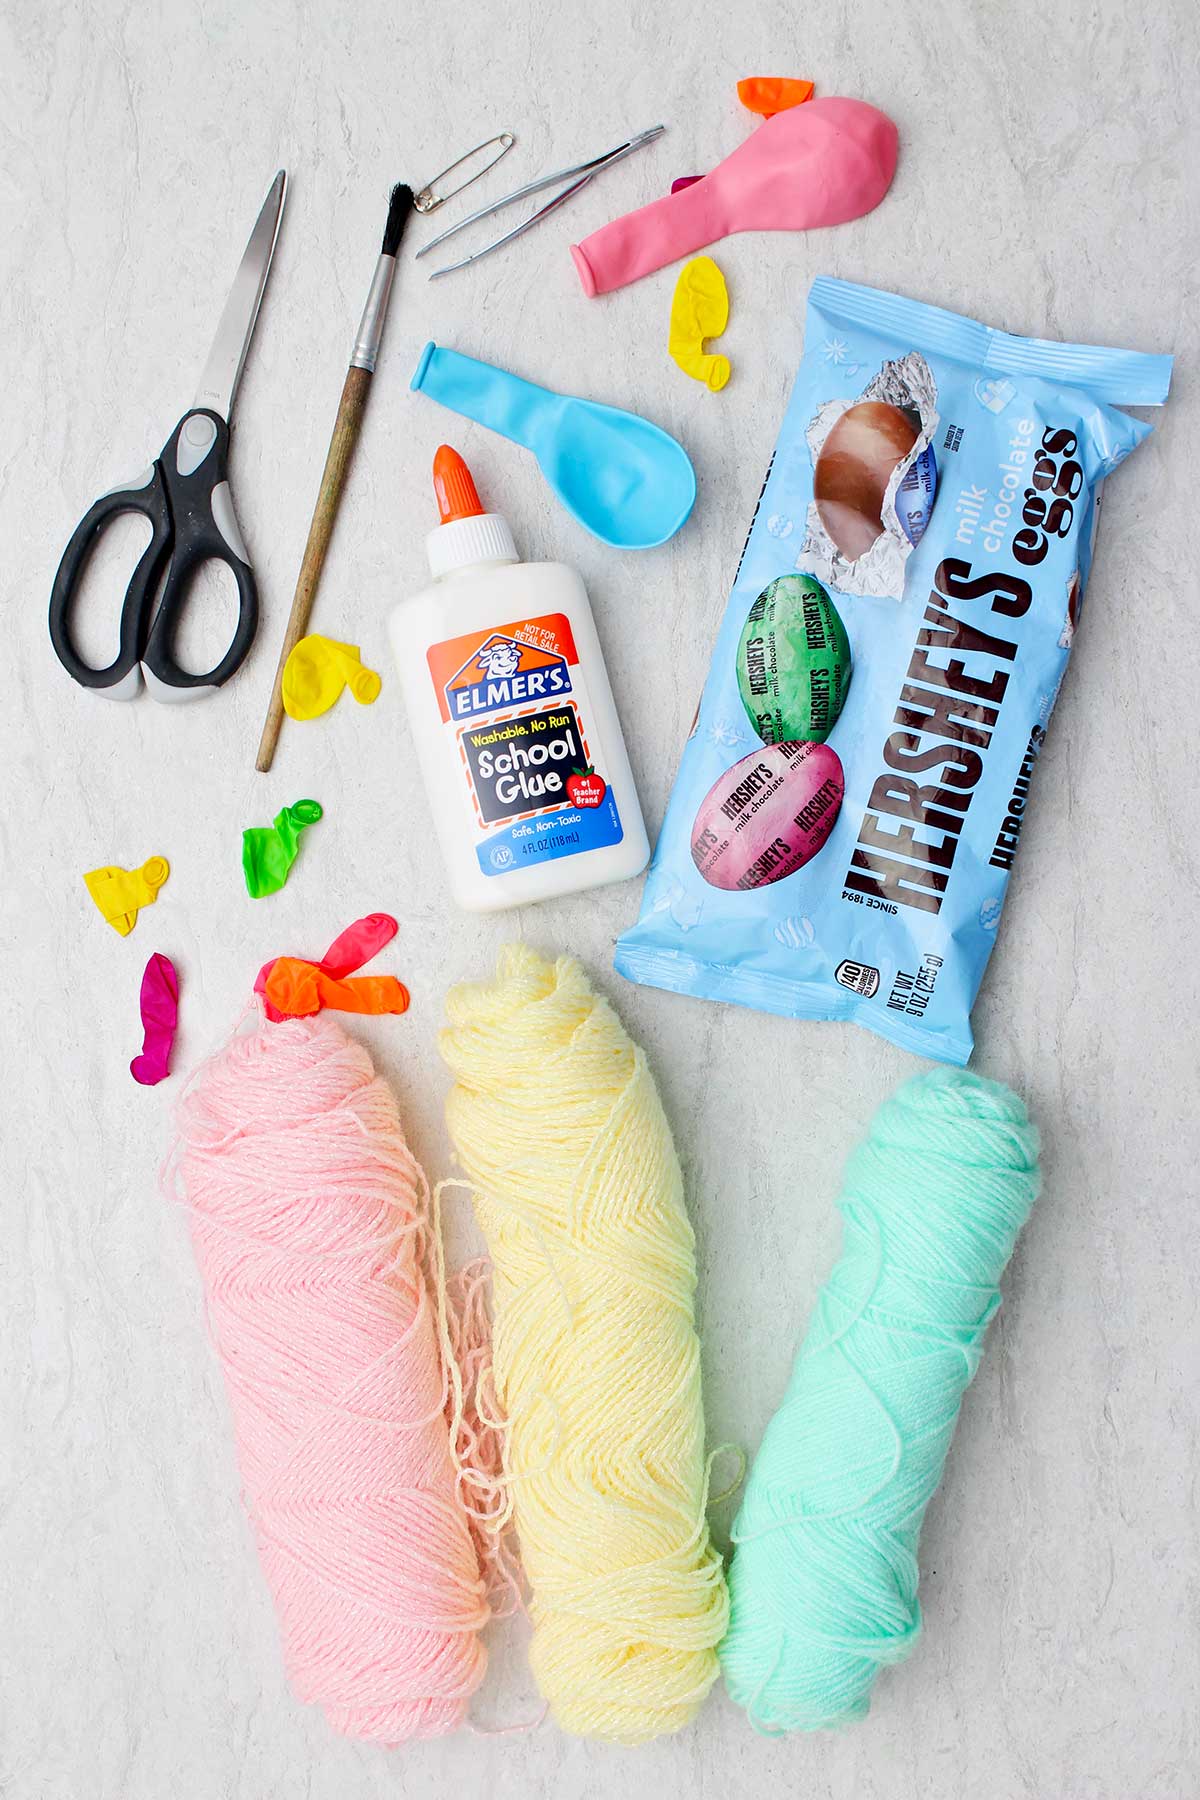 Supplies for String Eggs for Easter. Three colors of yarn, small balloons, white glue, scissors, paintbrush, tweezers and candy eggs.